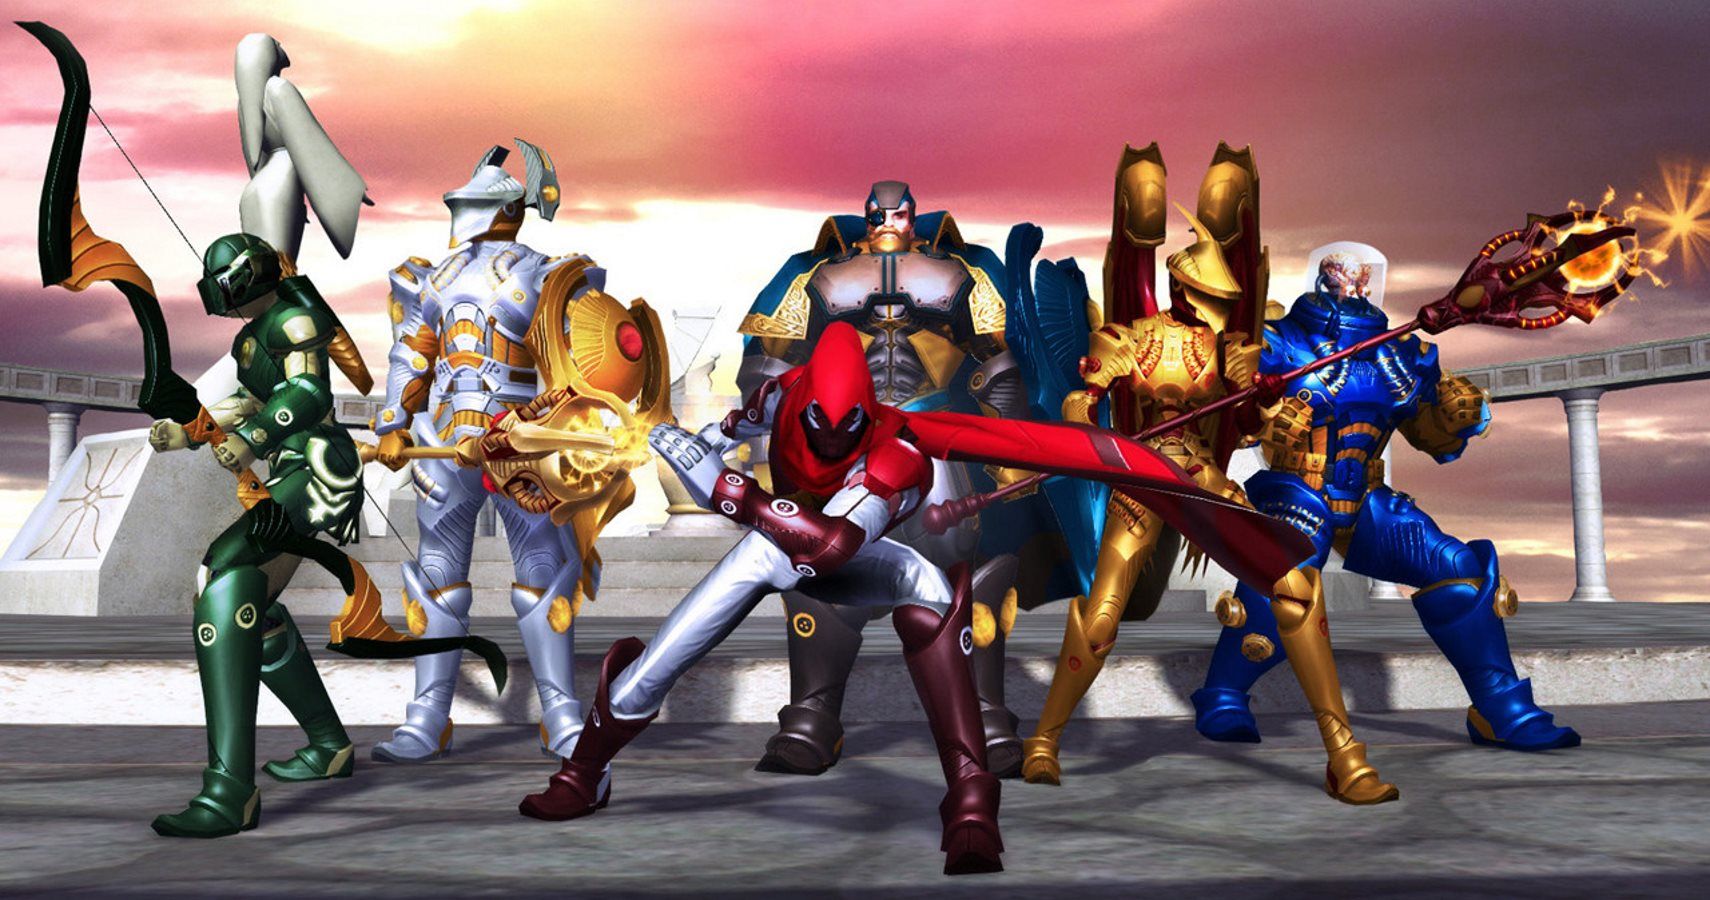 want to play city of heroes